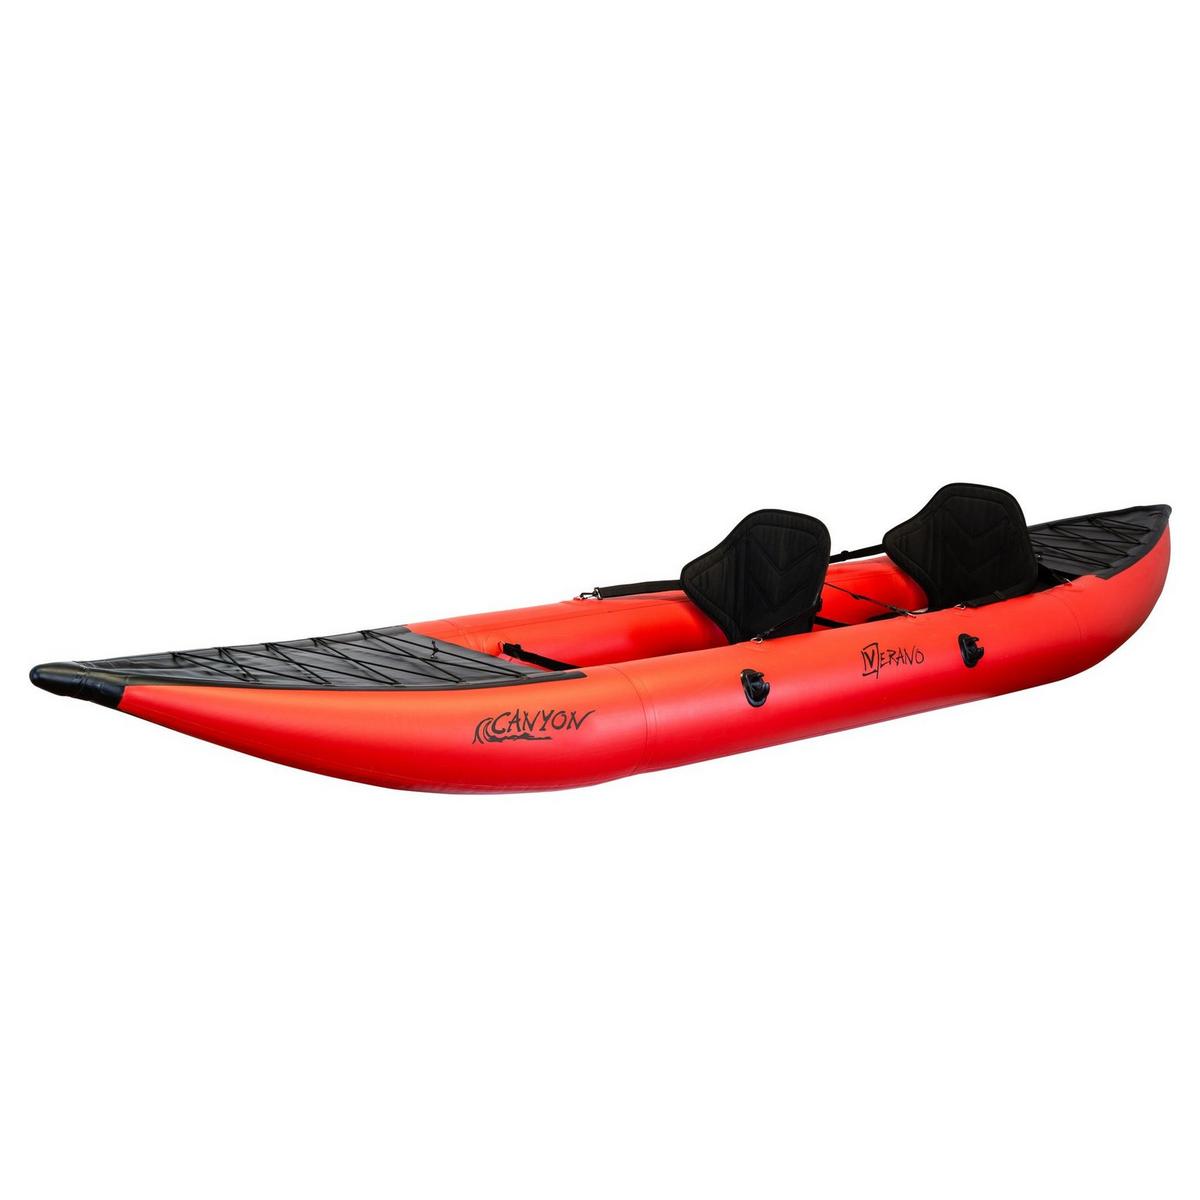 Verano Canyon Duo Inflatable Canoe - Red